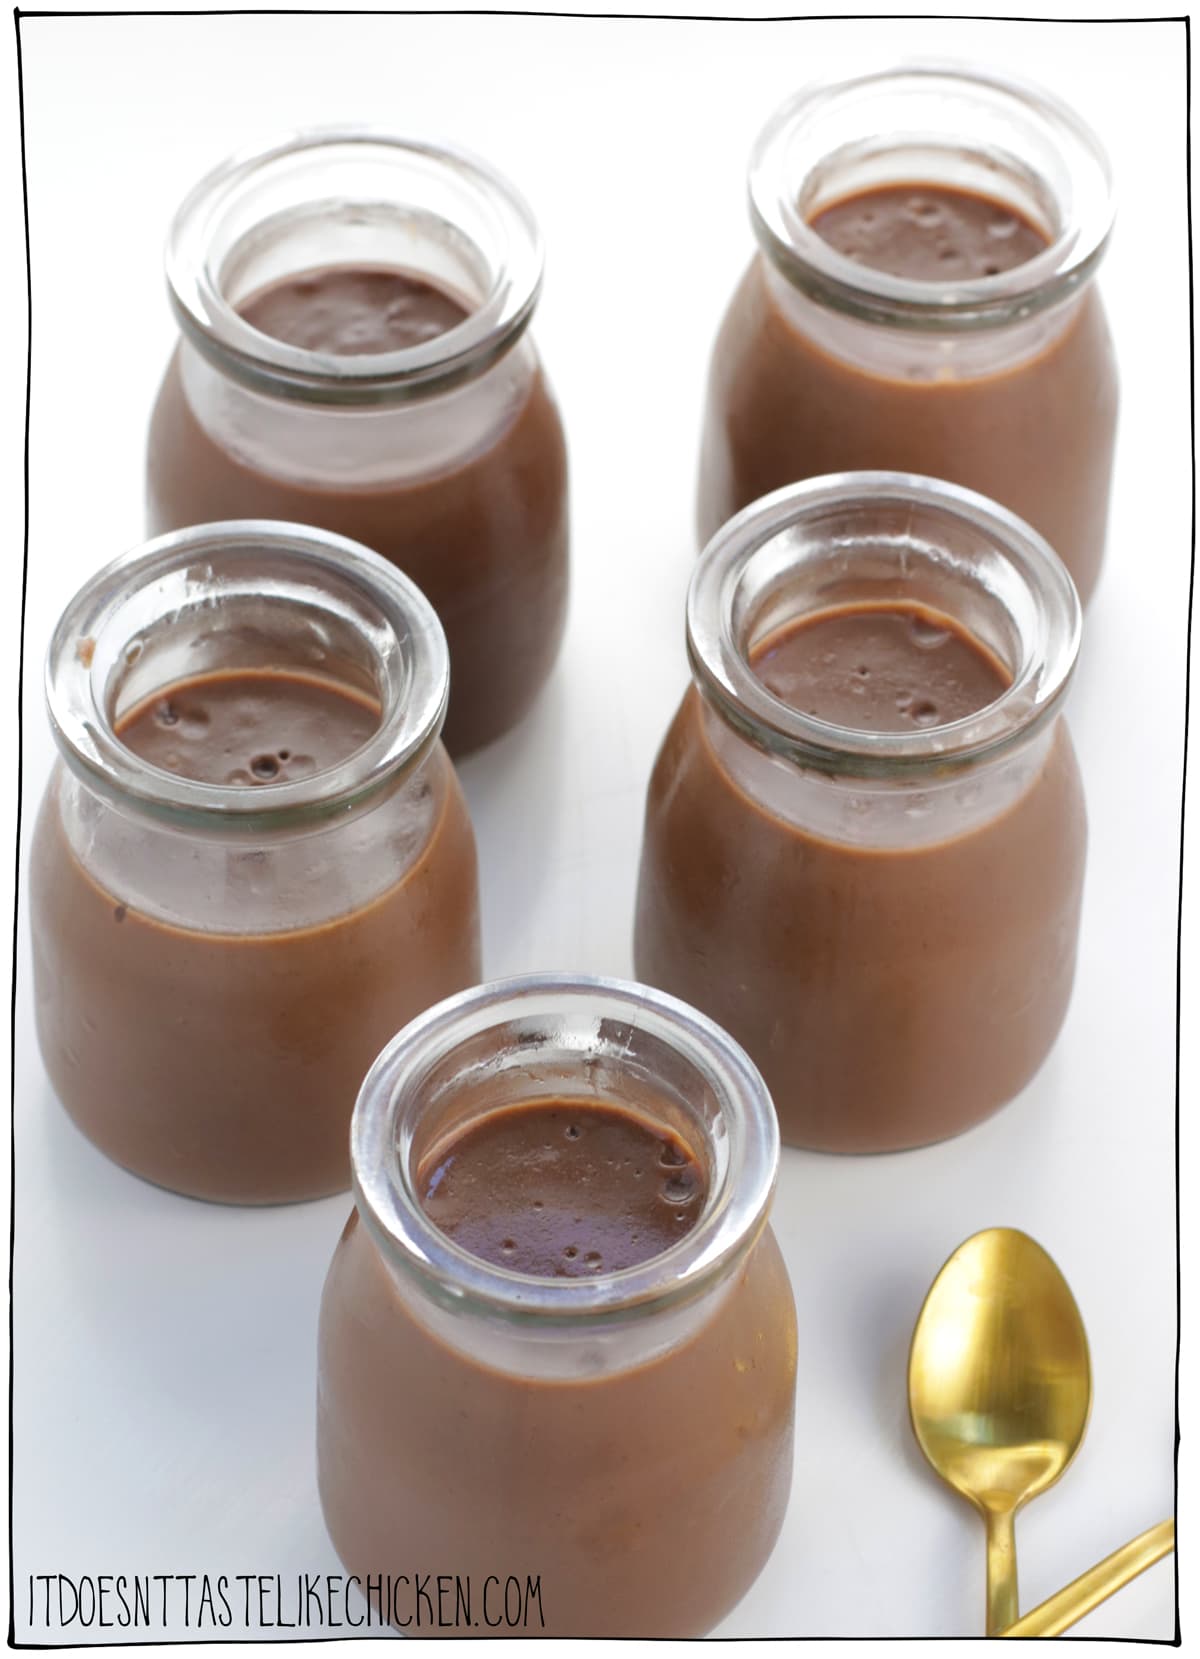 Easy Vegan Chocolate Pudding! Just 6 ingredients and 10 minutes to make. Super creamy chocolatey delicious, it's 20 thousand times better than those store-bought cups. The perfect addition to your school or work lunchbox, or for an easy dessert or snack! #itdoesnttastelikechicken #veganrecipes #vegankid #vegandessert